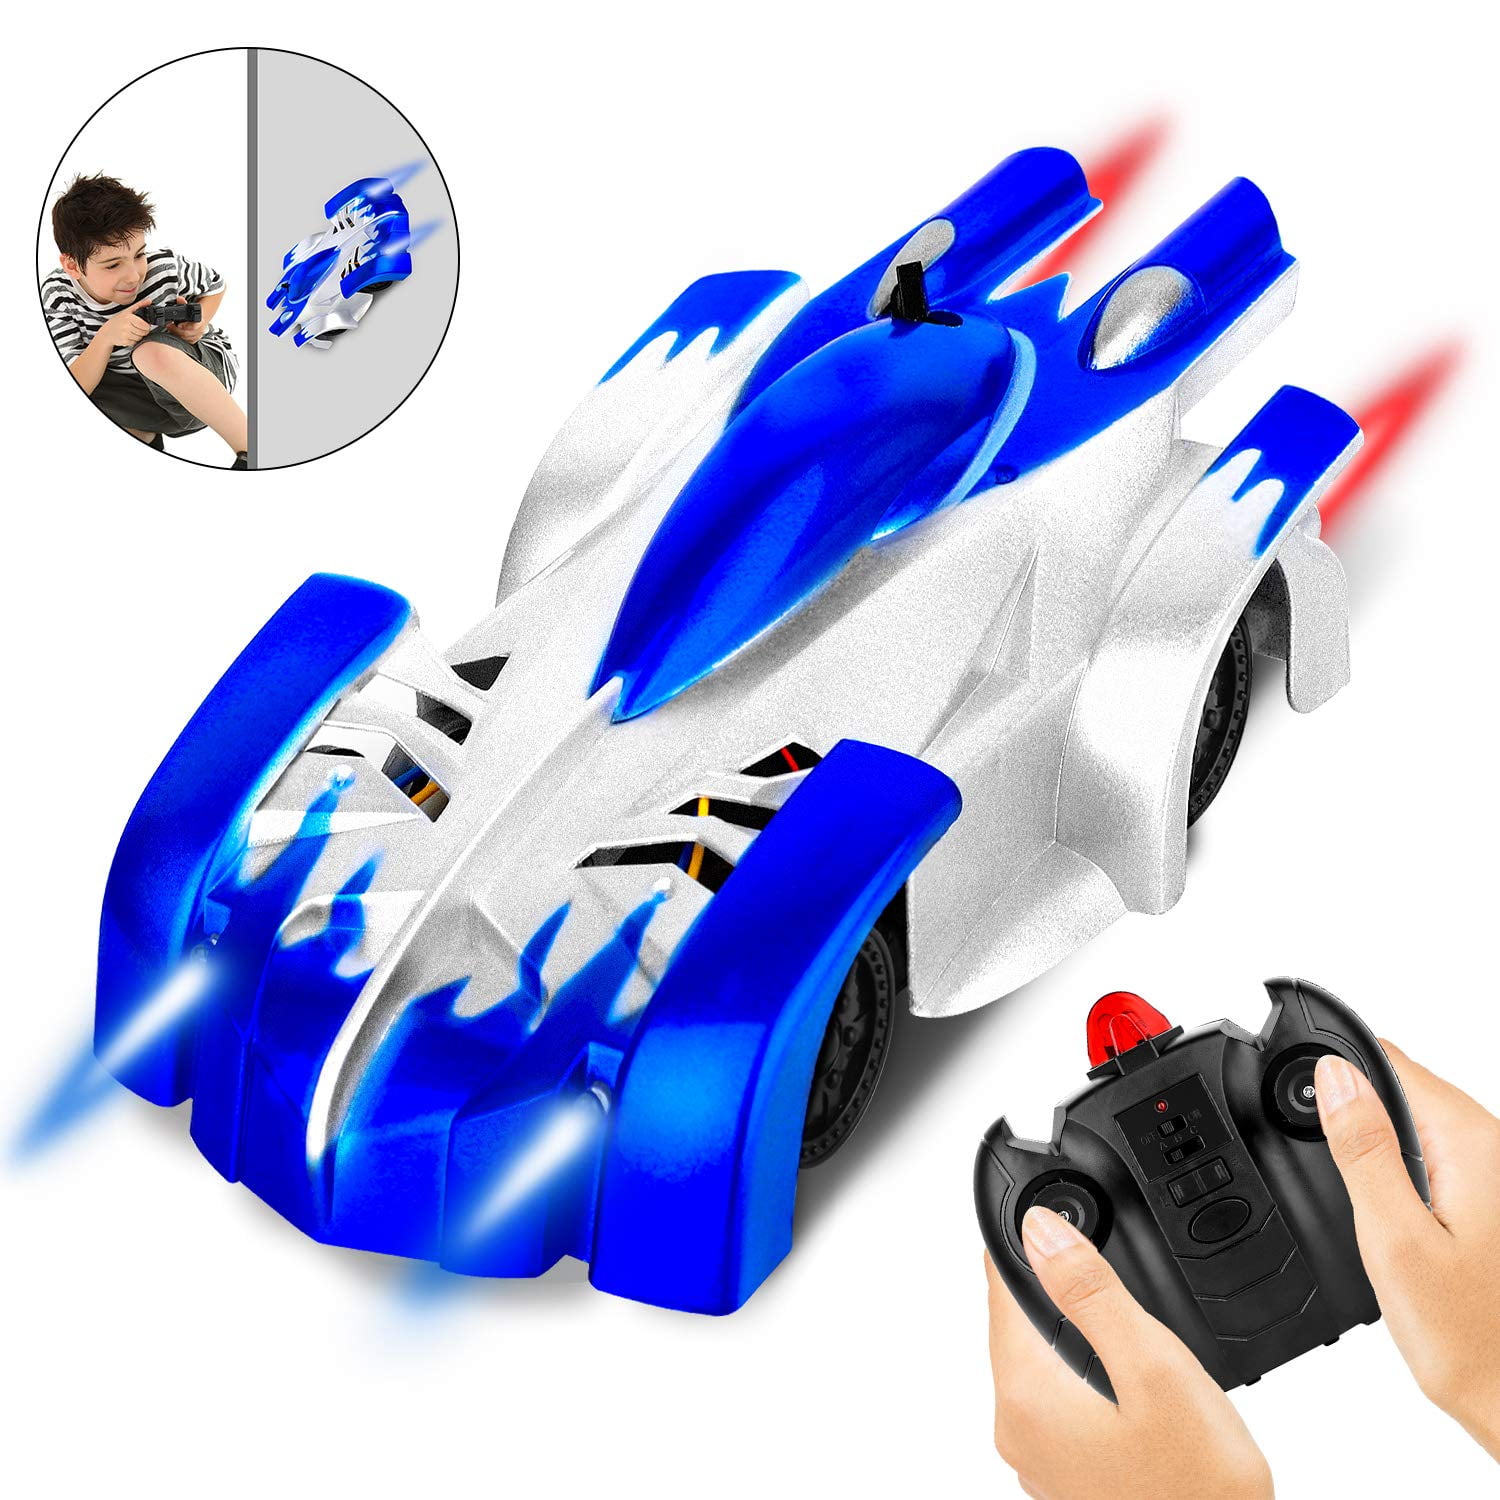 RC Car Toy for Kids Rotating Stunt Racing Gift Wall Climbing Remote Control Car 